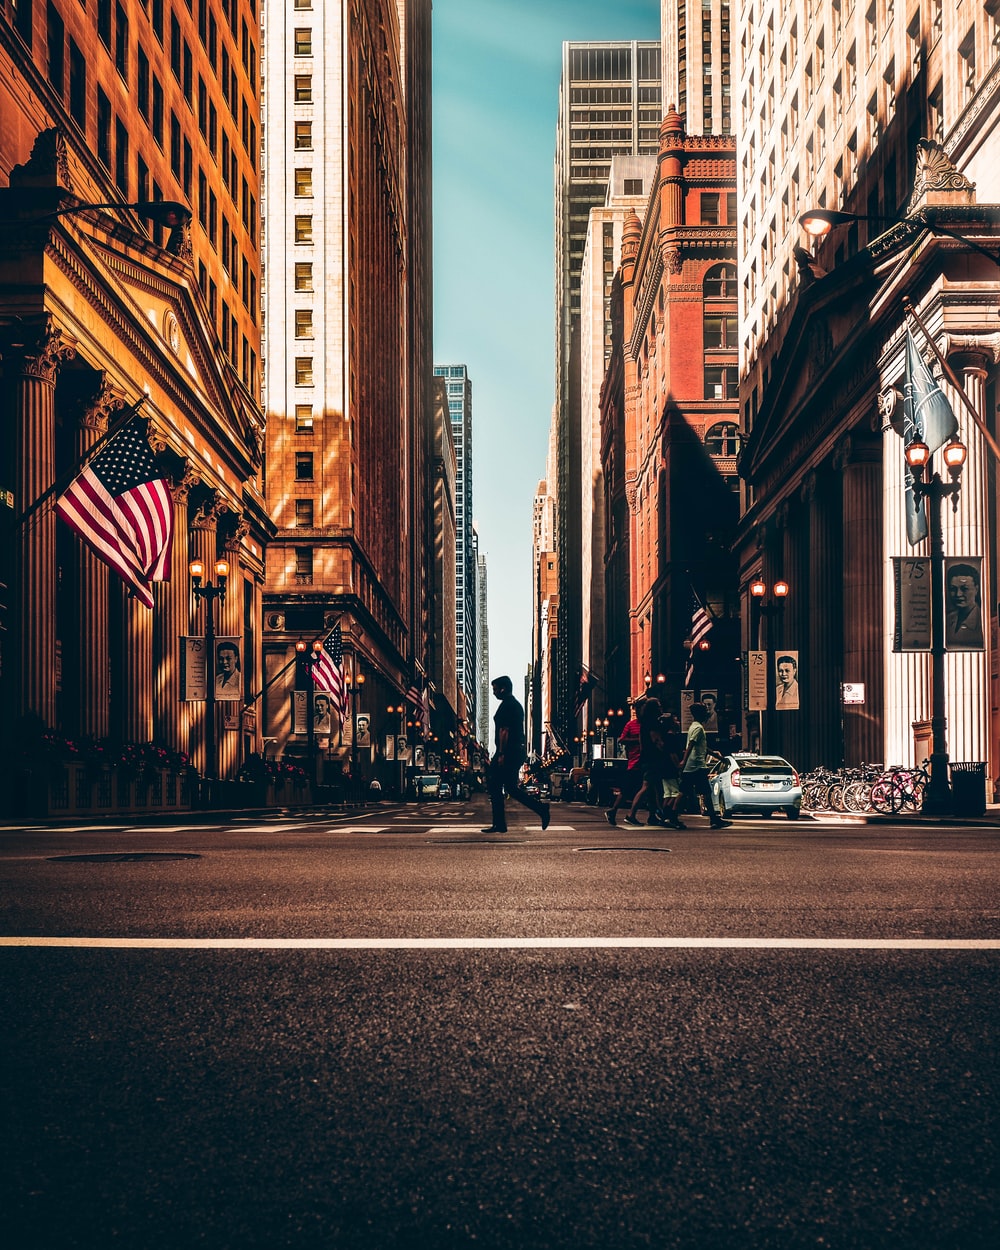 America Street Picture. Download Free Image